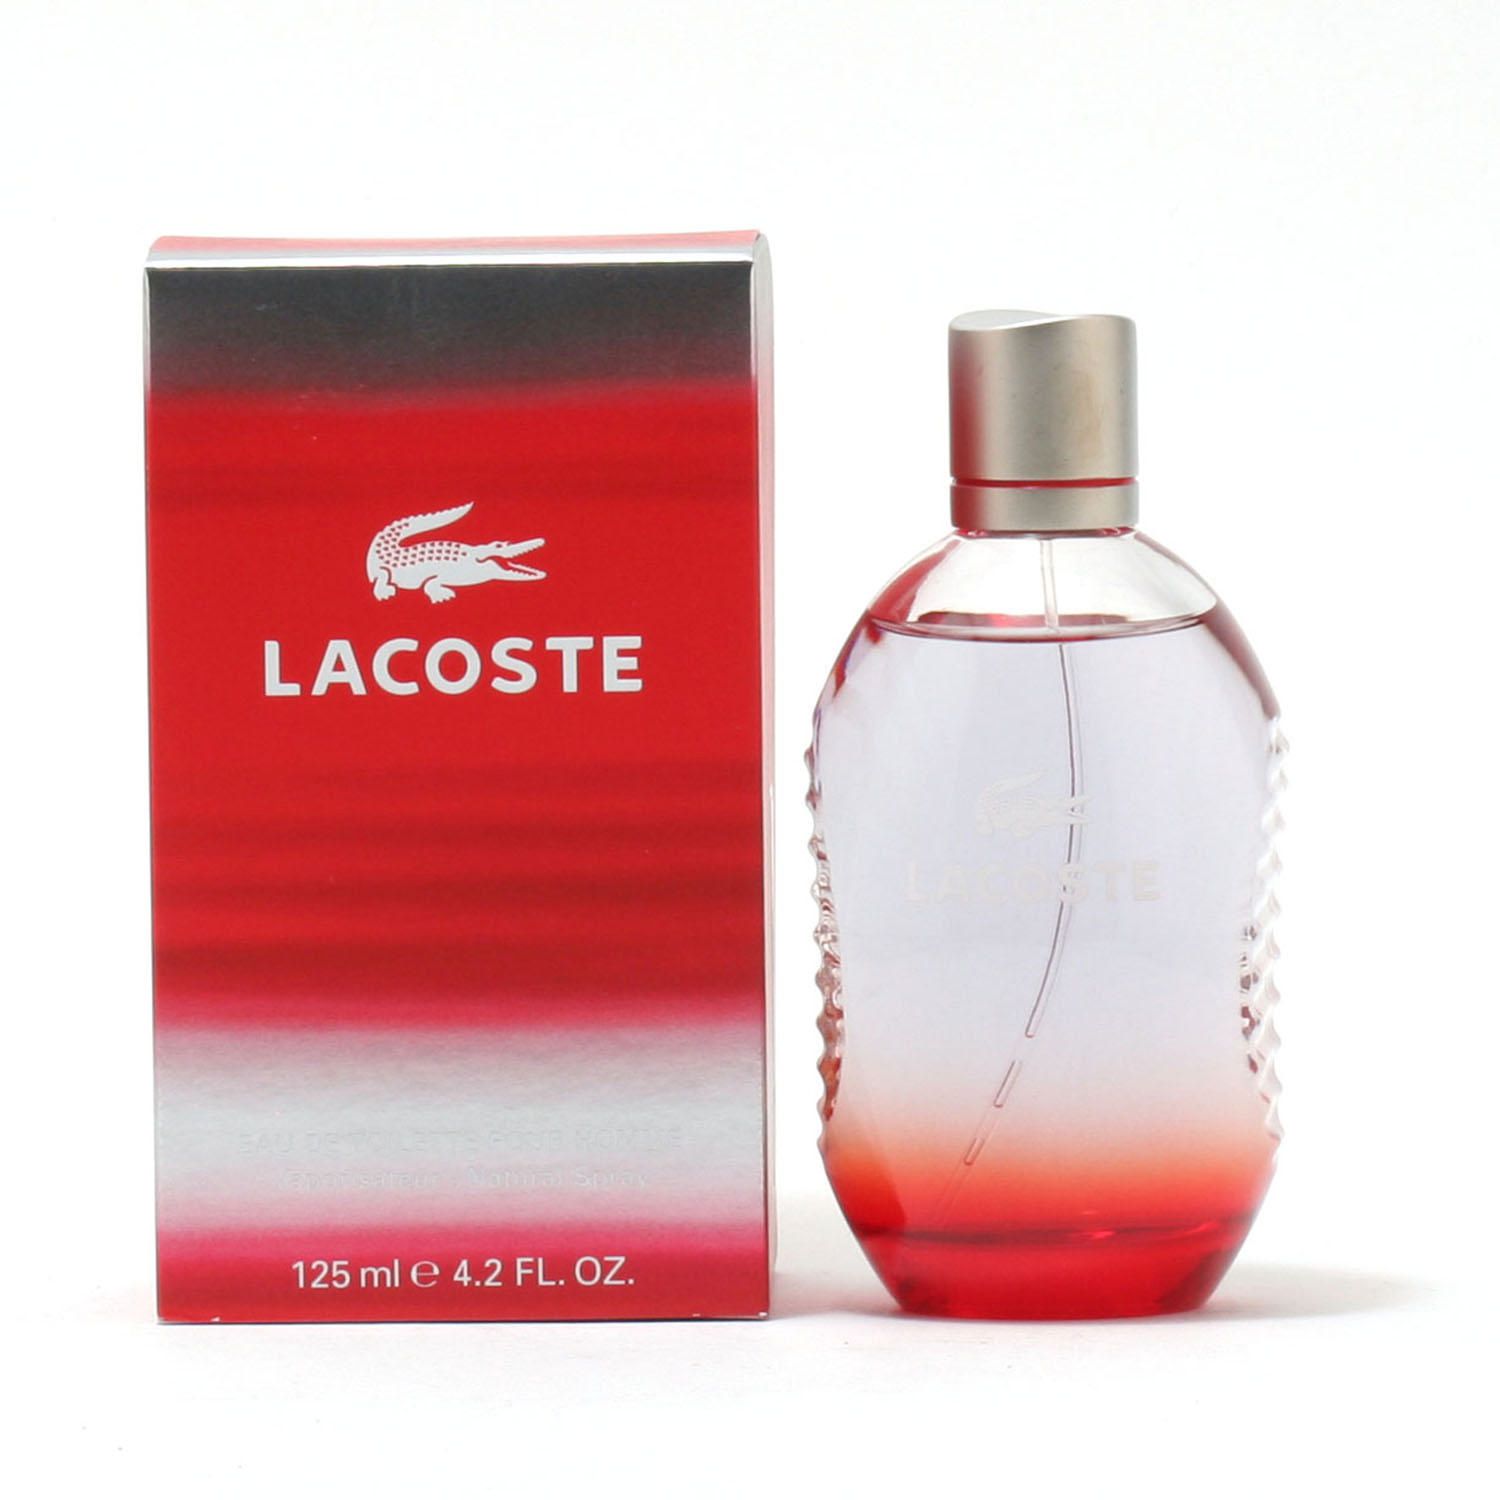 LACOSTE STYLE IN PLAY MEN- EDT SPRAY (RED) 124mL | Walmart Canada